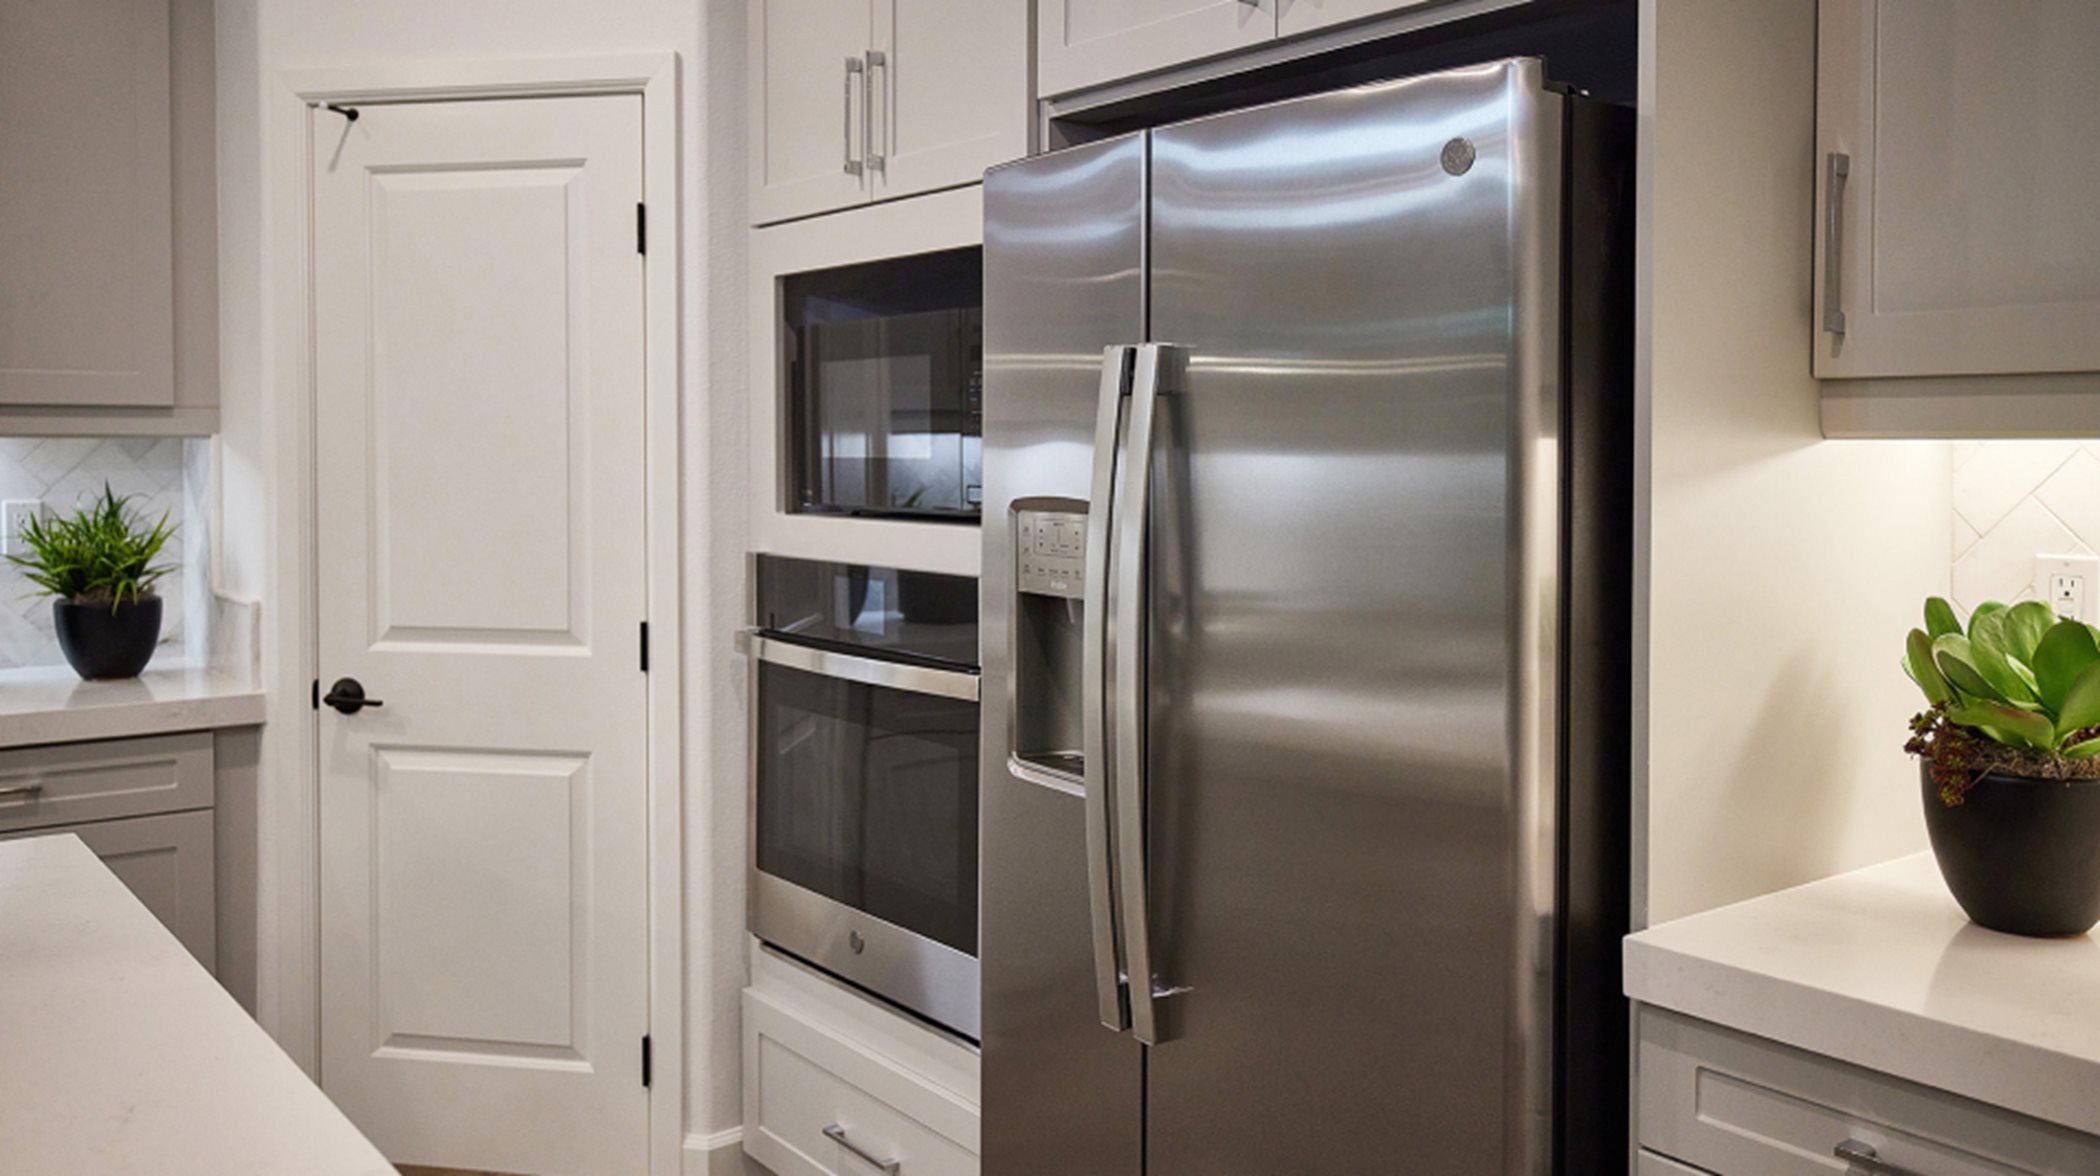 A brand-new GE Profile™ side-by-side refrigerator is included in the stainless steel appliance package